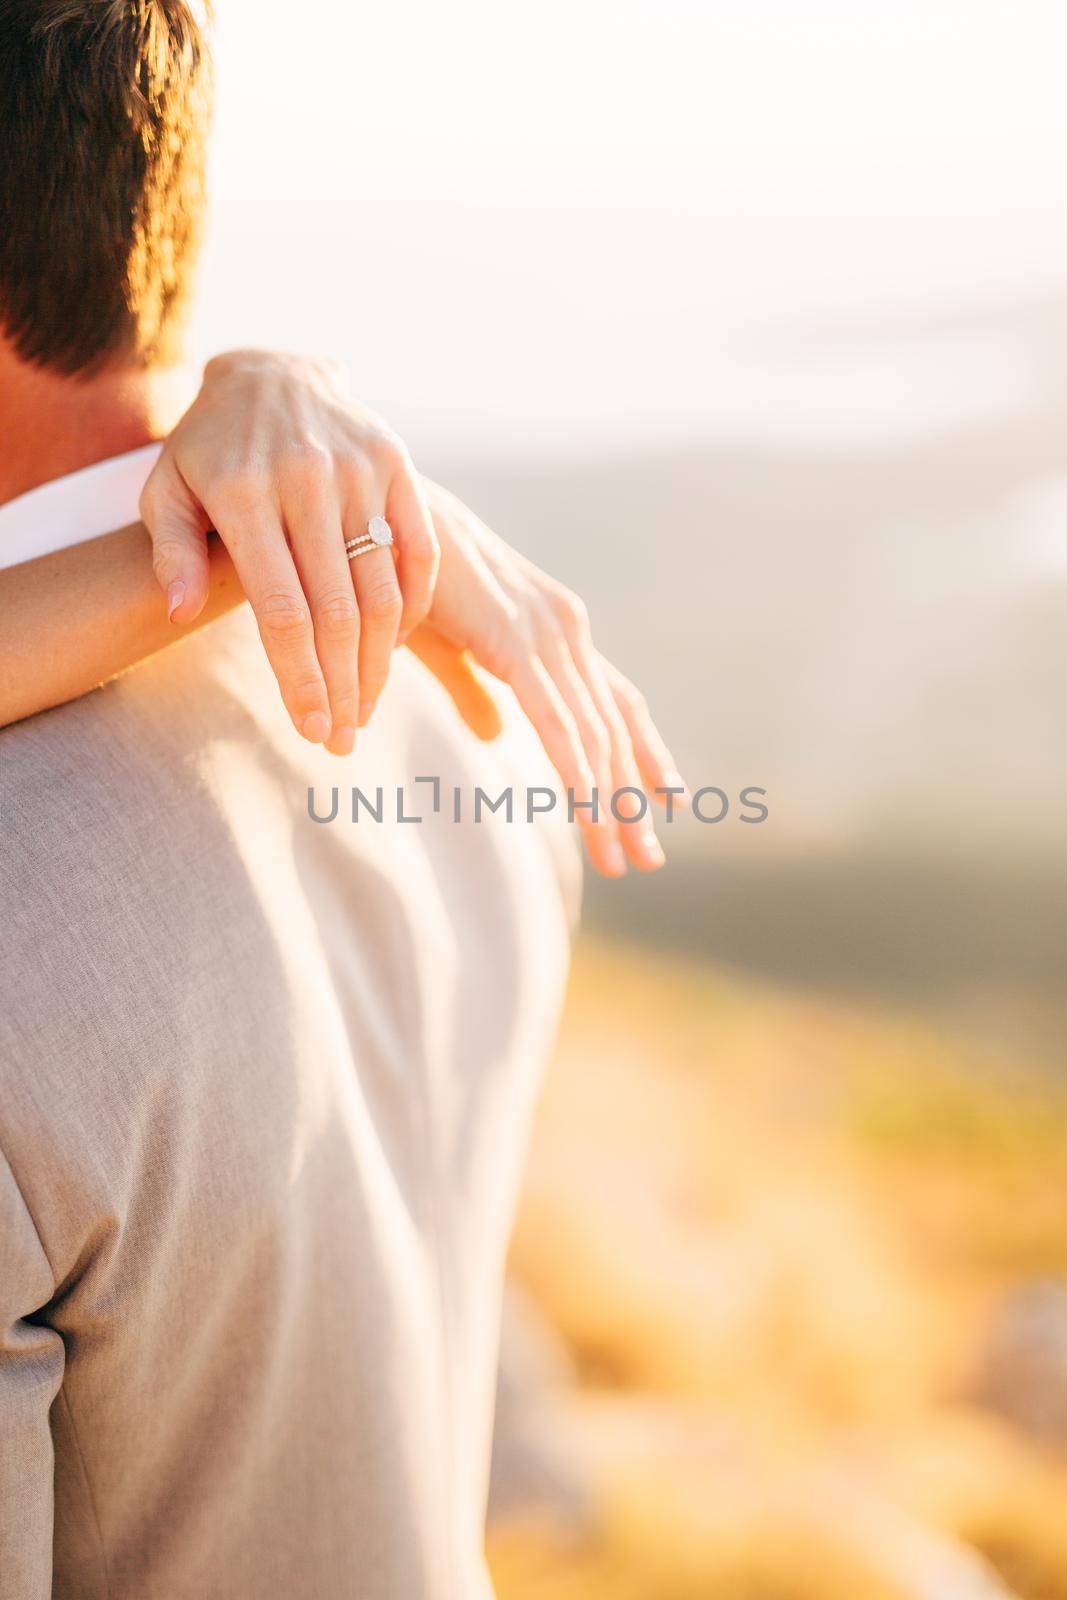 The bride hugs the groom, the bride's hands with the wedding ring on the groom's shoulders, close-up . High quality photo